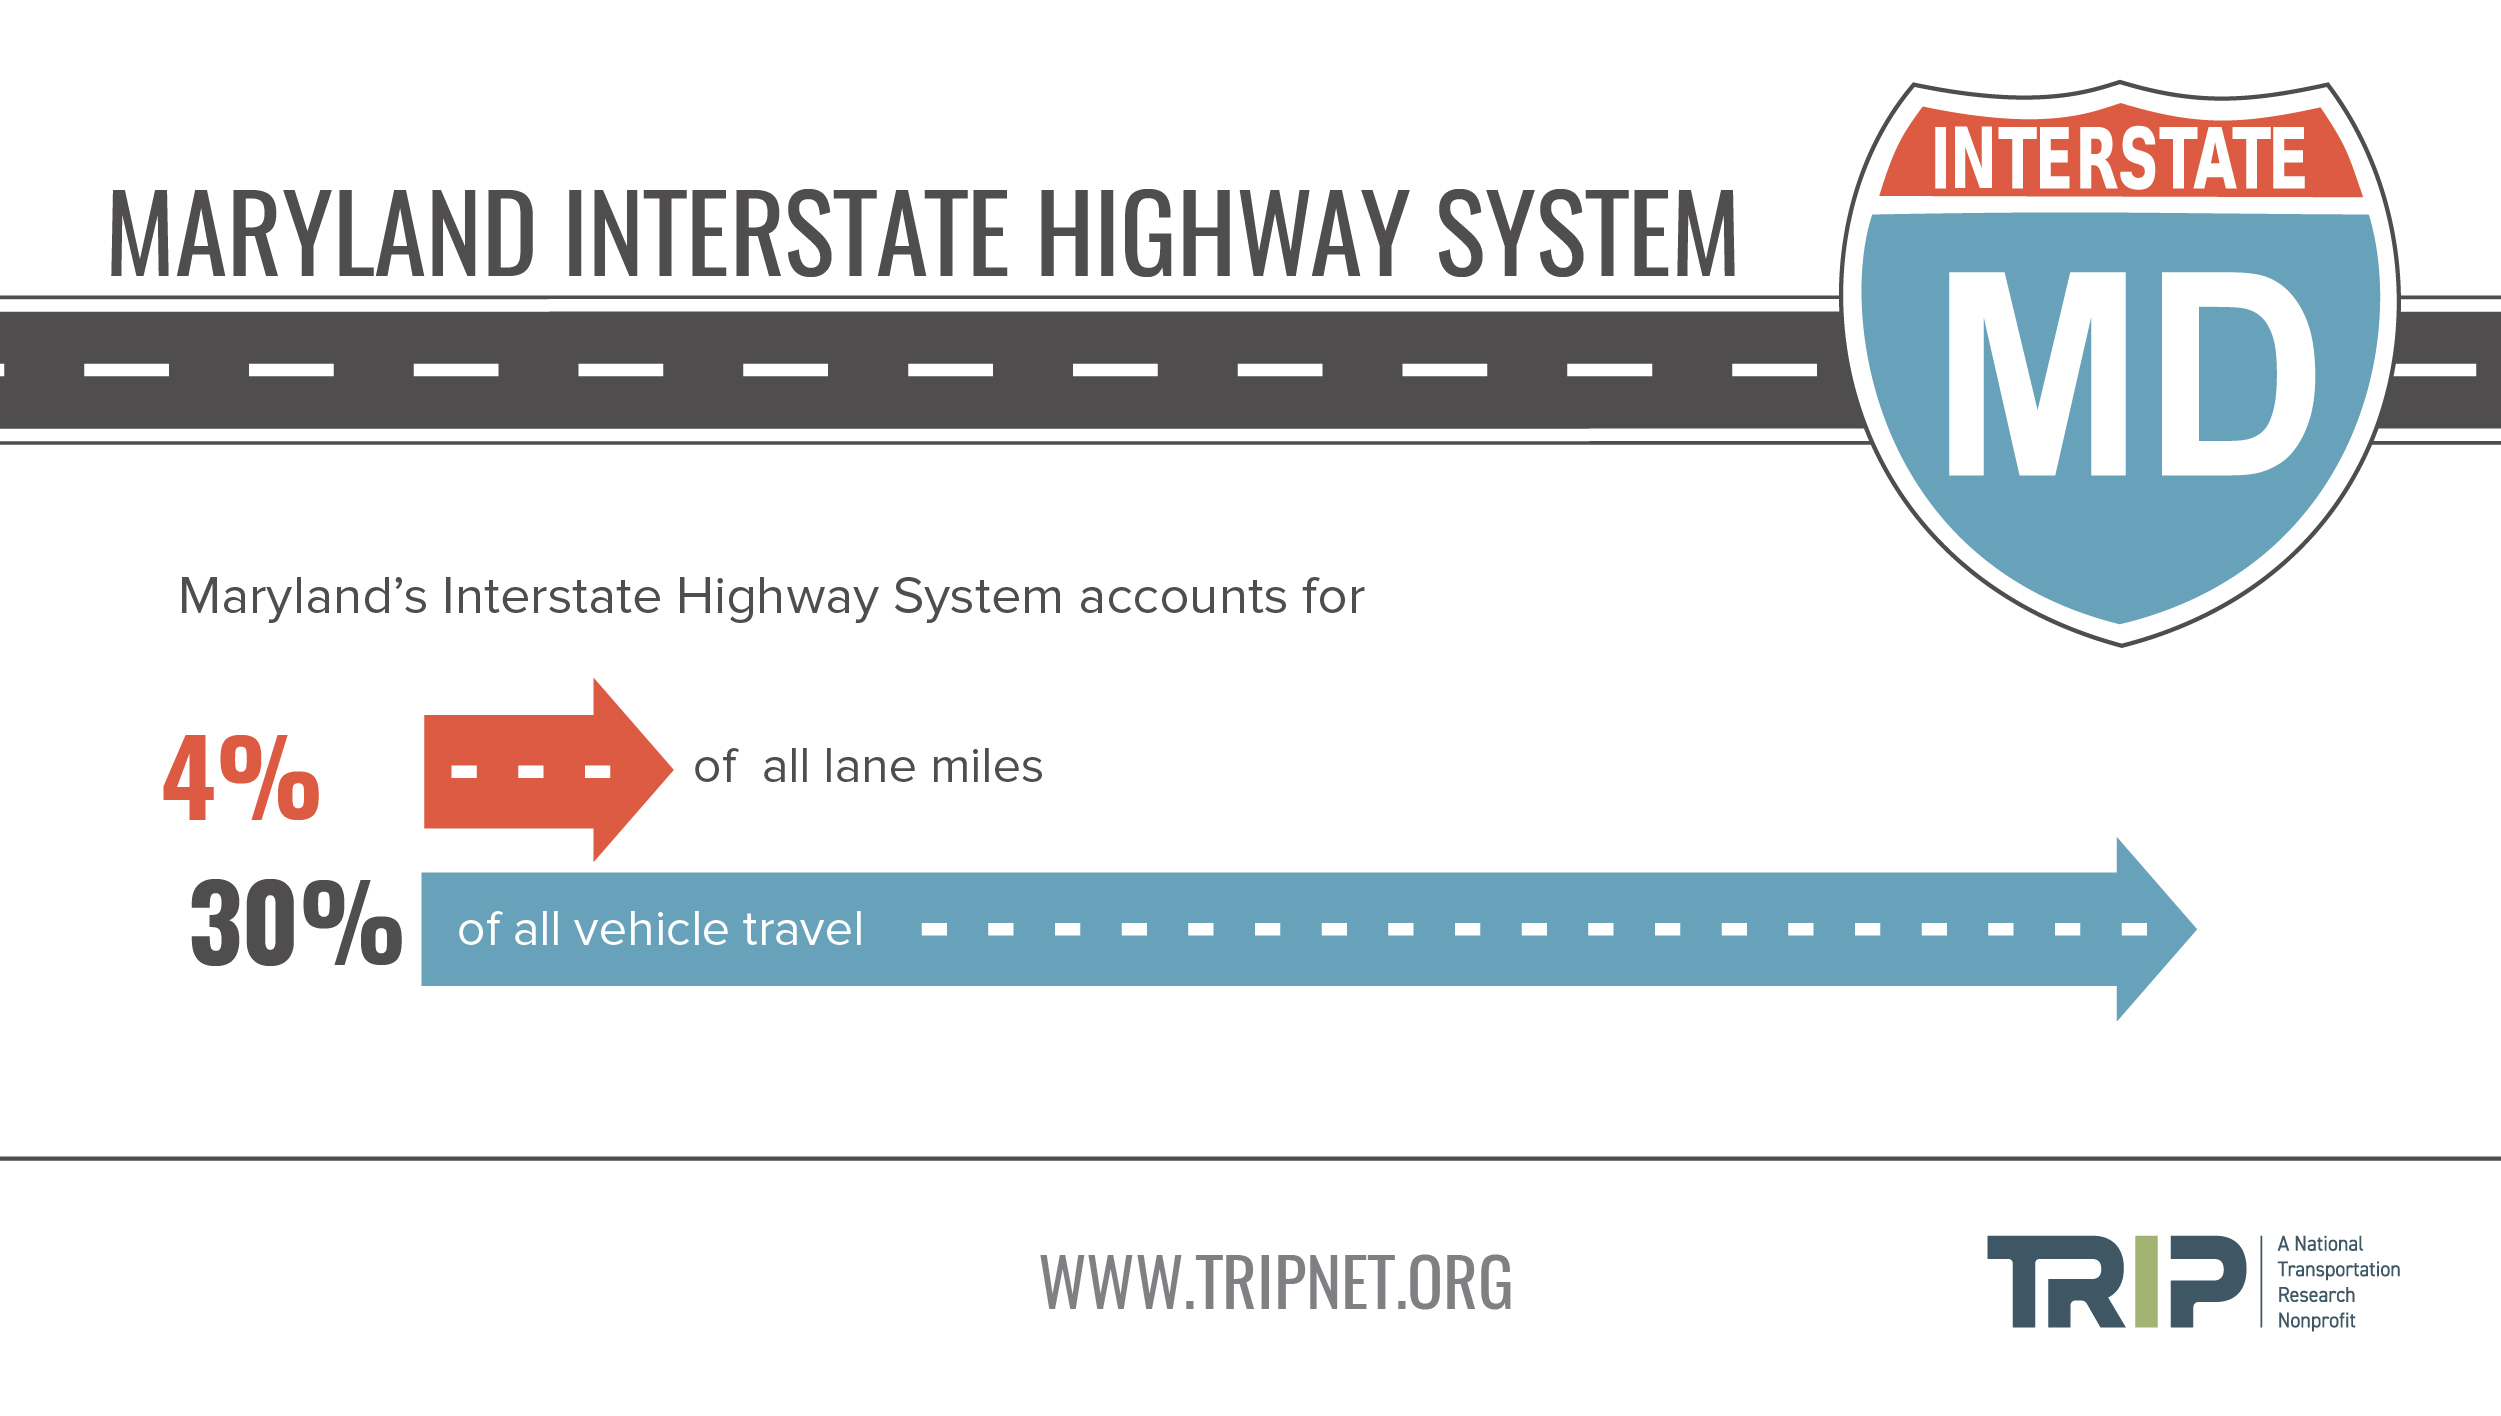 Maryland Interstate Lane Miles and Vehicle Travel Infographic – August 2020